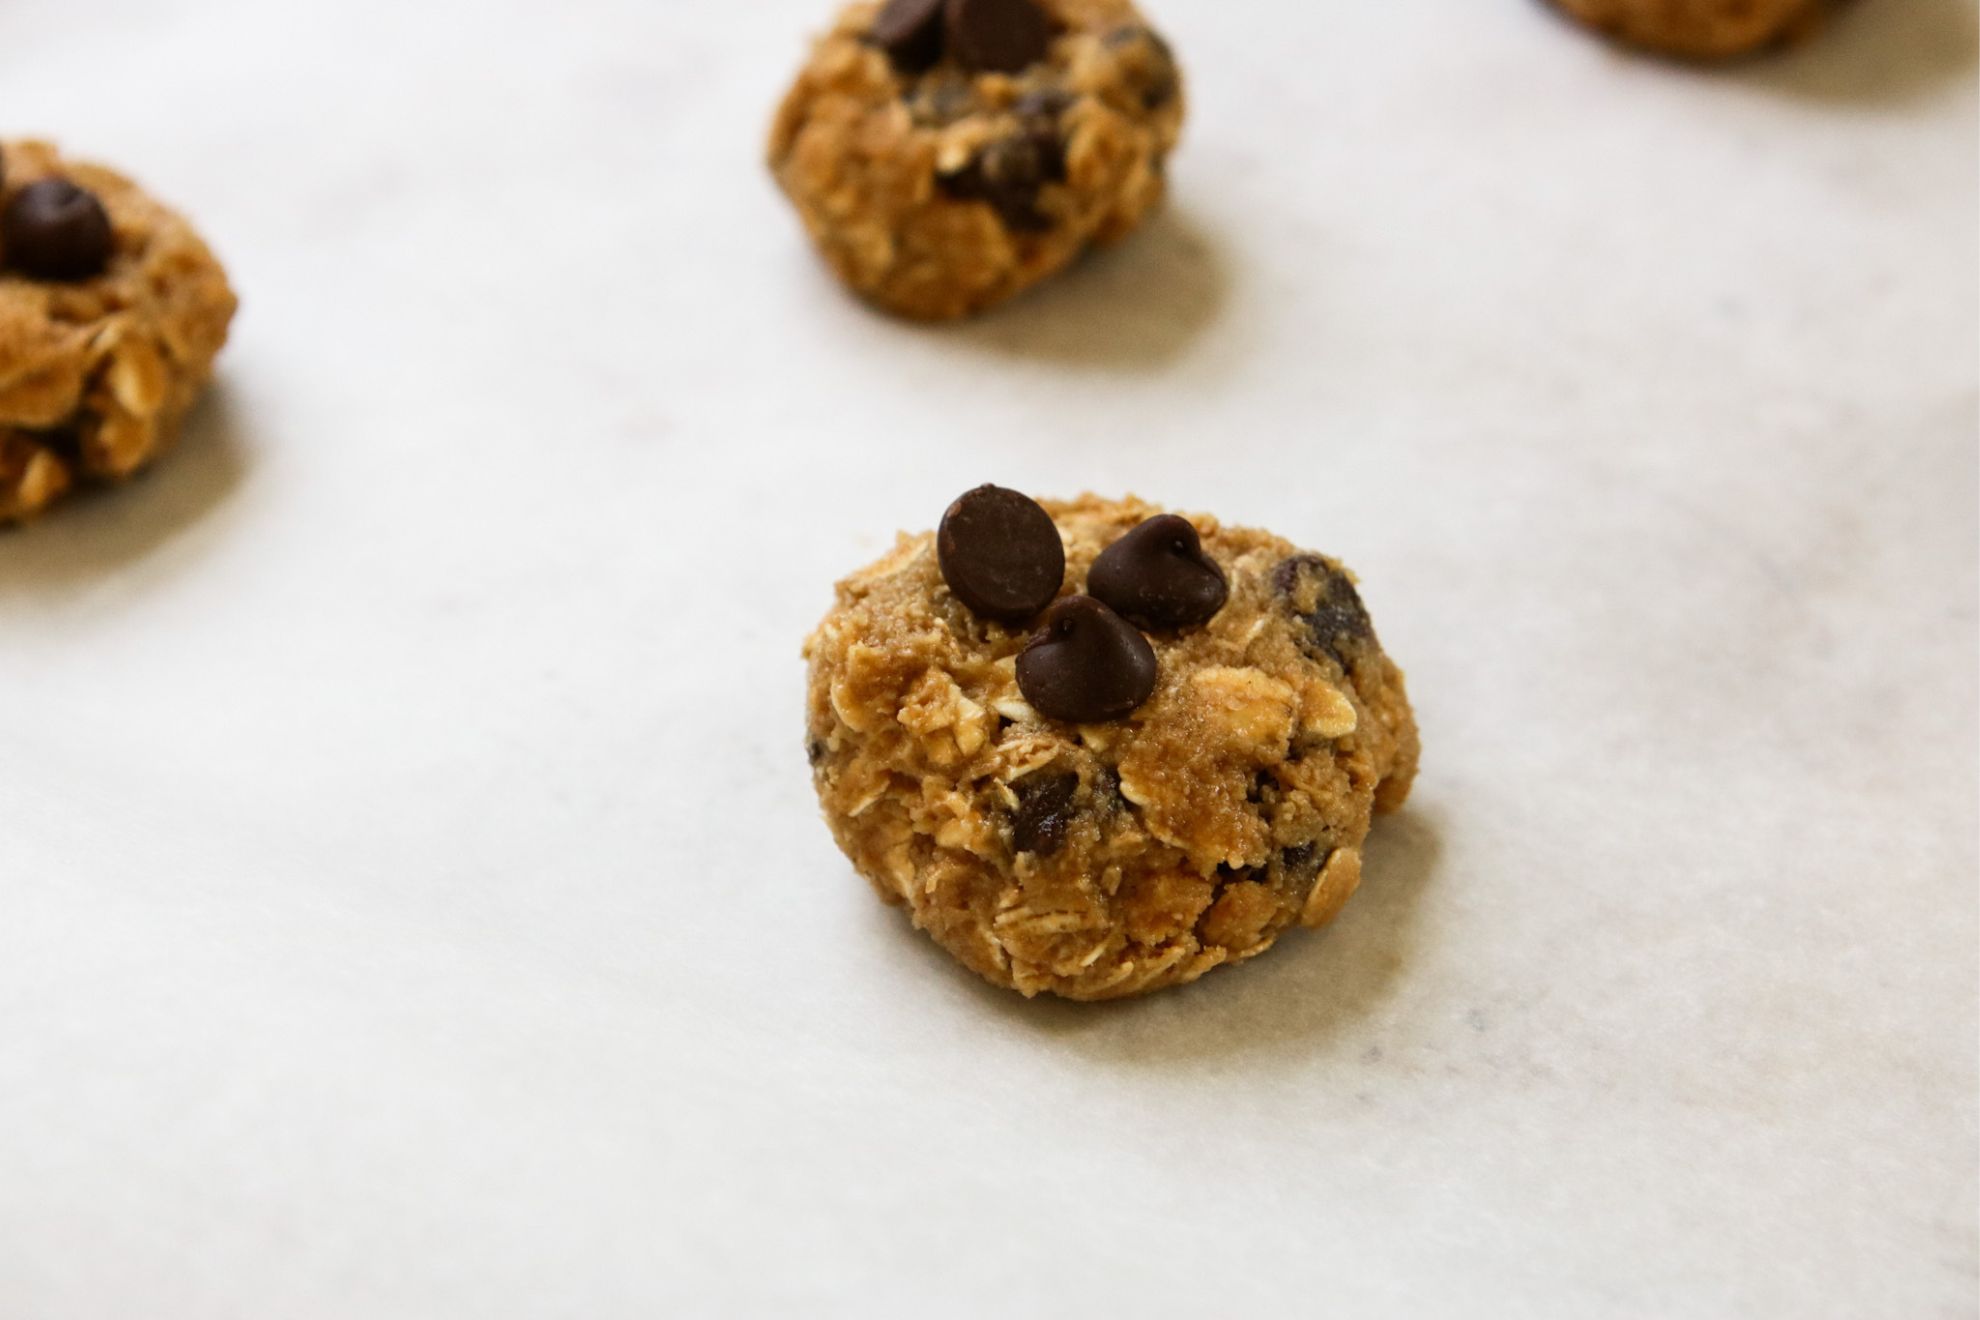 This is a horizontal image showing the side view of a flattened oatmeal cookie dough ball topped with chocolate chips. The cookie dough is raw and sits on a piece of white parchment paper. More cookie dough are in the background behind the main one in focus.